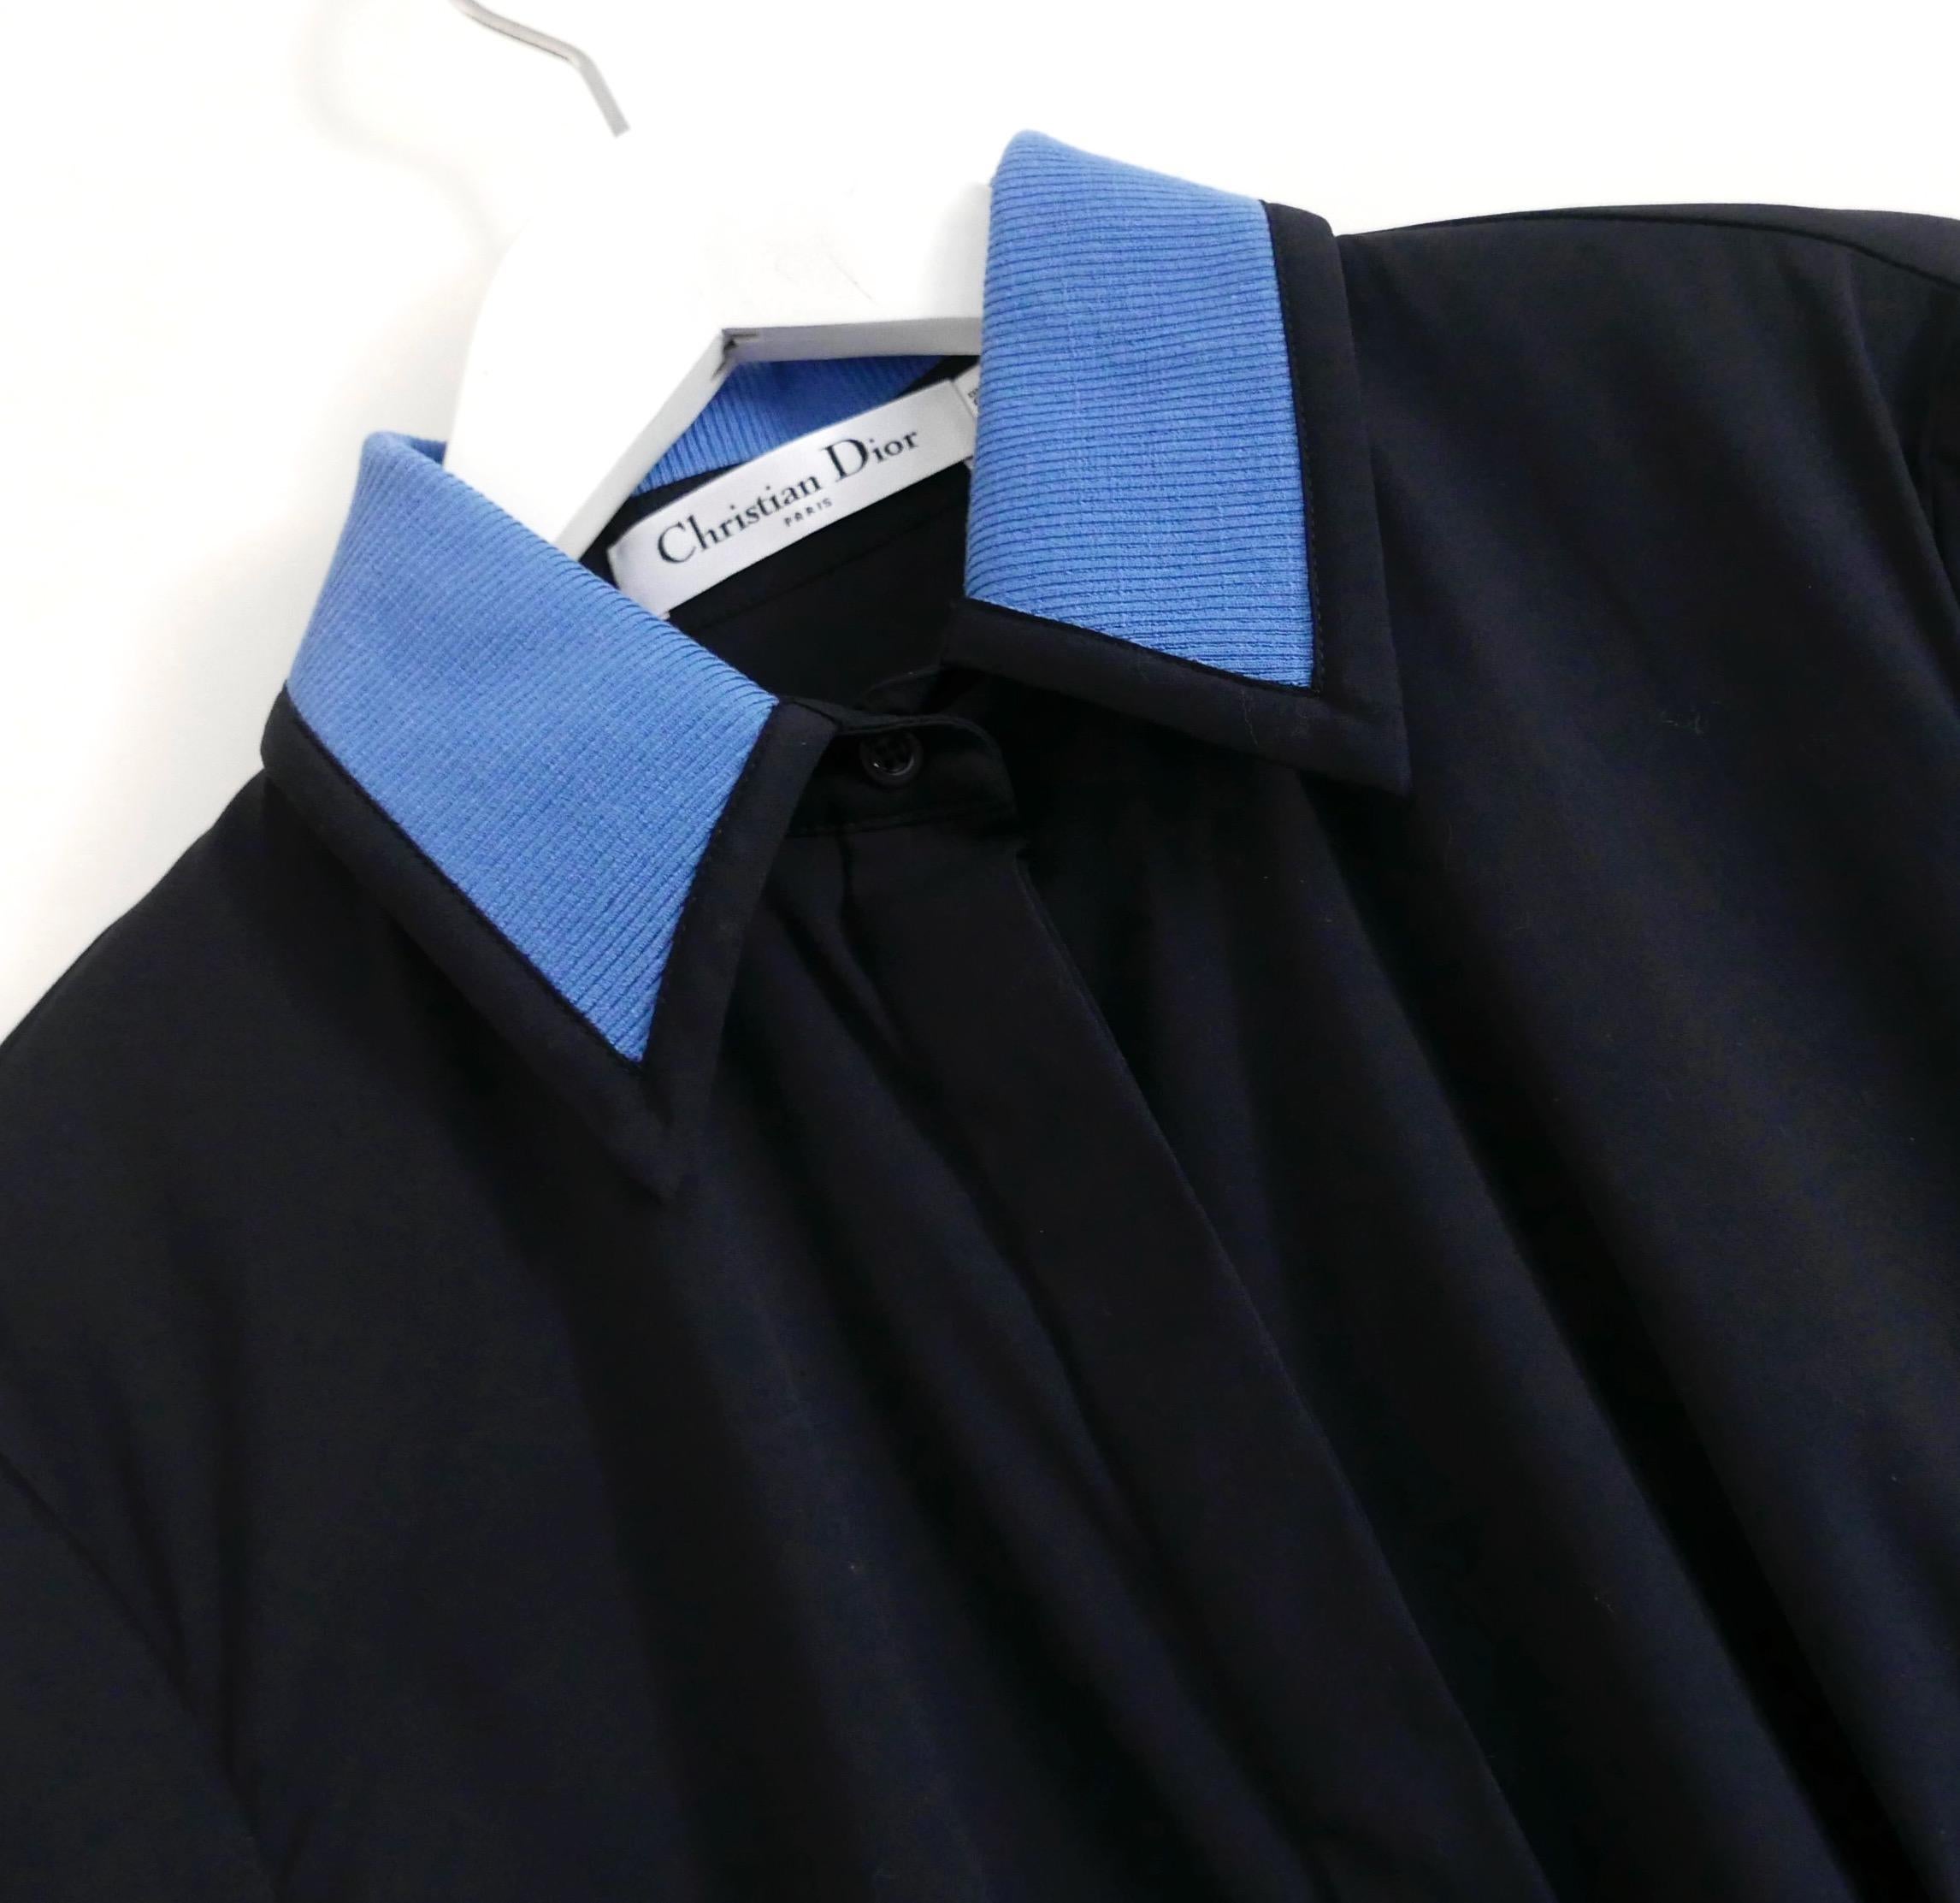 Dior x Raf Simons Pre-Fall 2015 Knit Collar Tailored Shirt In New Condition For Sale In London, GB